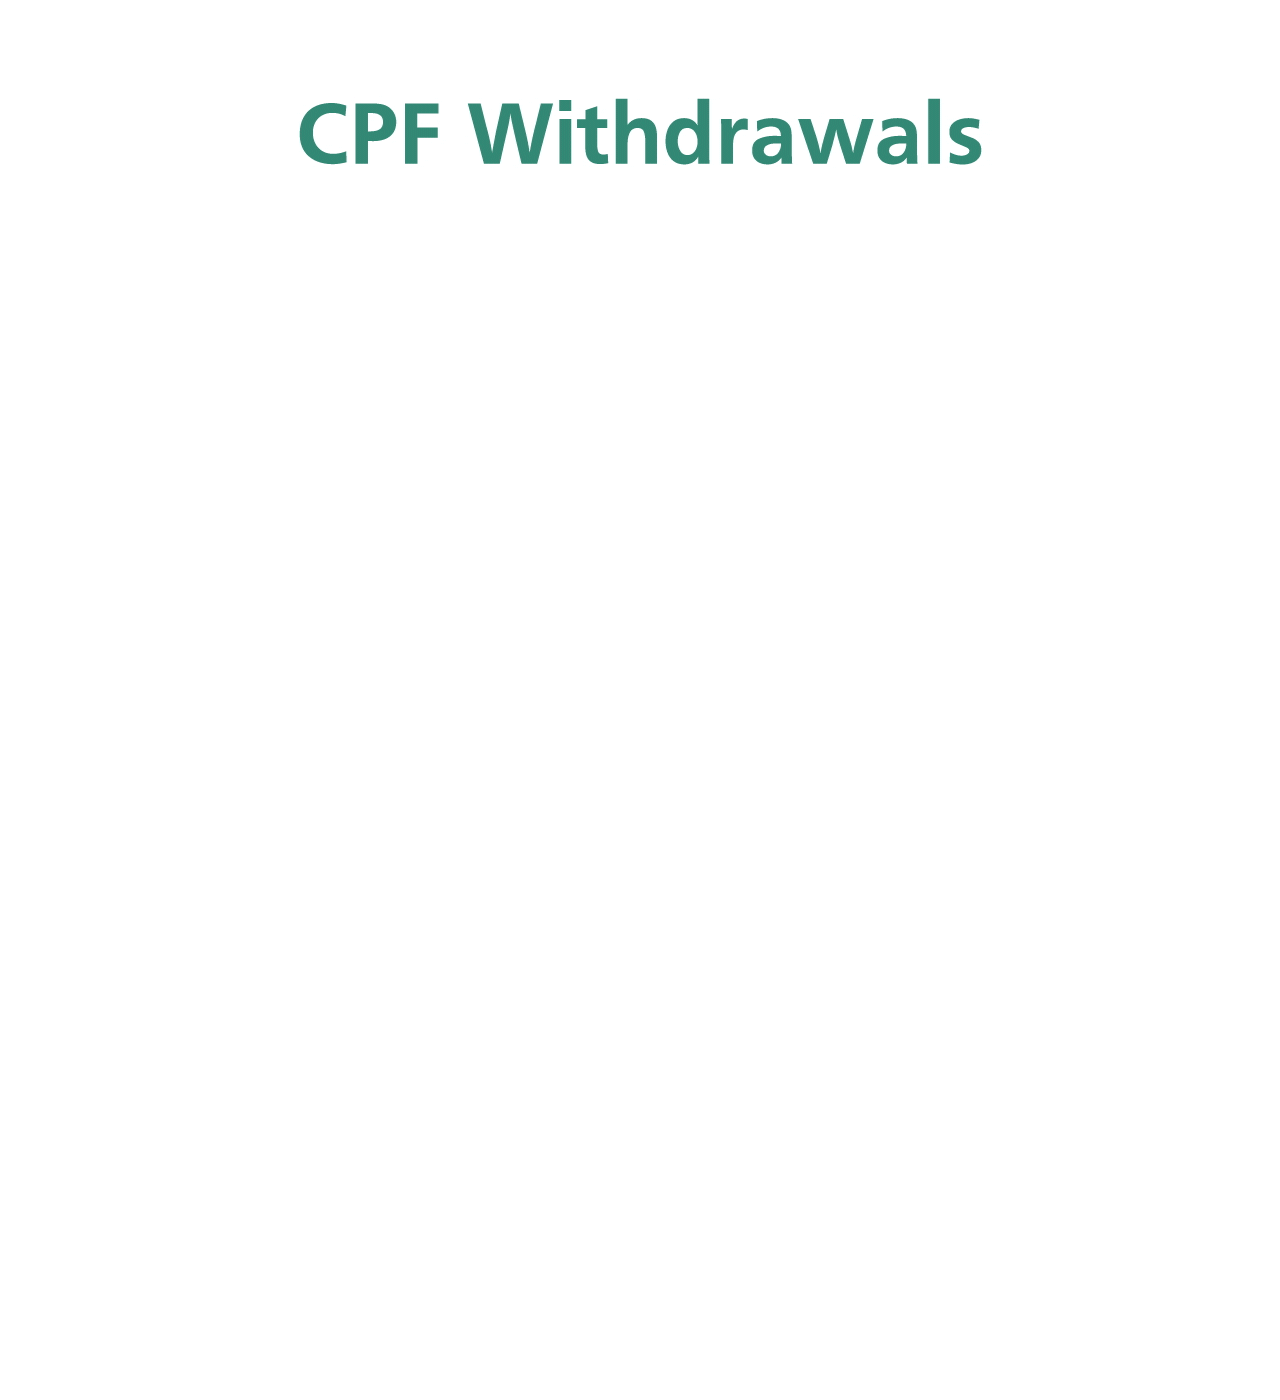 $7.4 billion was disbursed to CPF members in 2021 - $5.3 billion was to members who reached the age of 55 and have set aside their Cohort Full Retirement Sum in their Retirement Account, $1.5 billion was disbursed due to death and reduced life expectancy, and $0.6 billion was disbursed to members who left Singapore and West Malaysia permanently, and Malaysians who left Singapore to reside in West Malaysia.